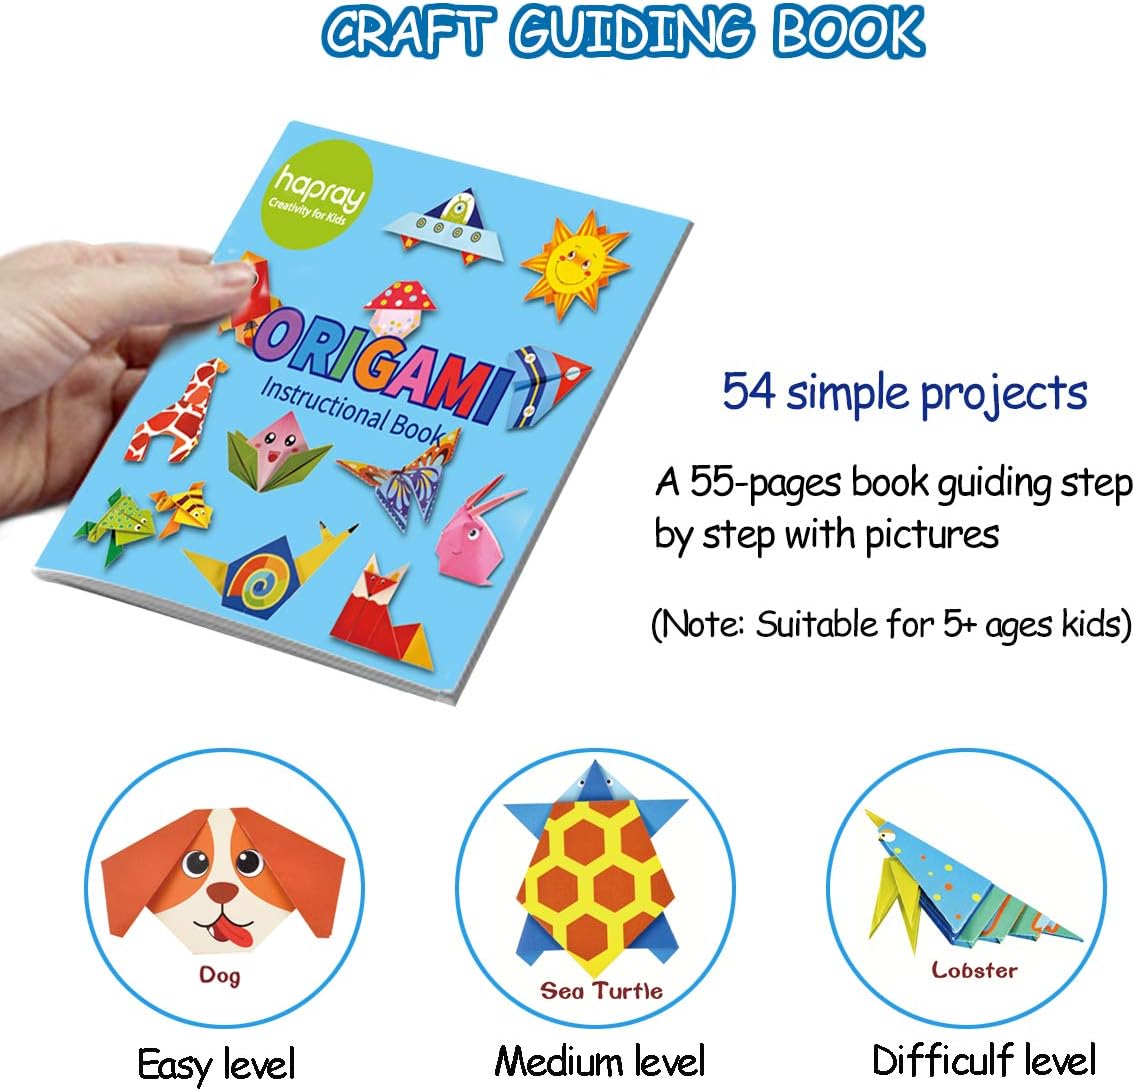 108 double-sided 6-inch origami sheets with 54 projects